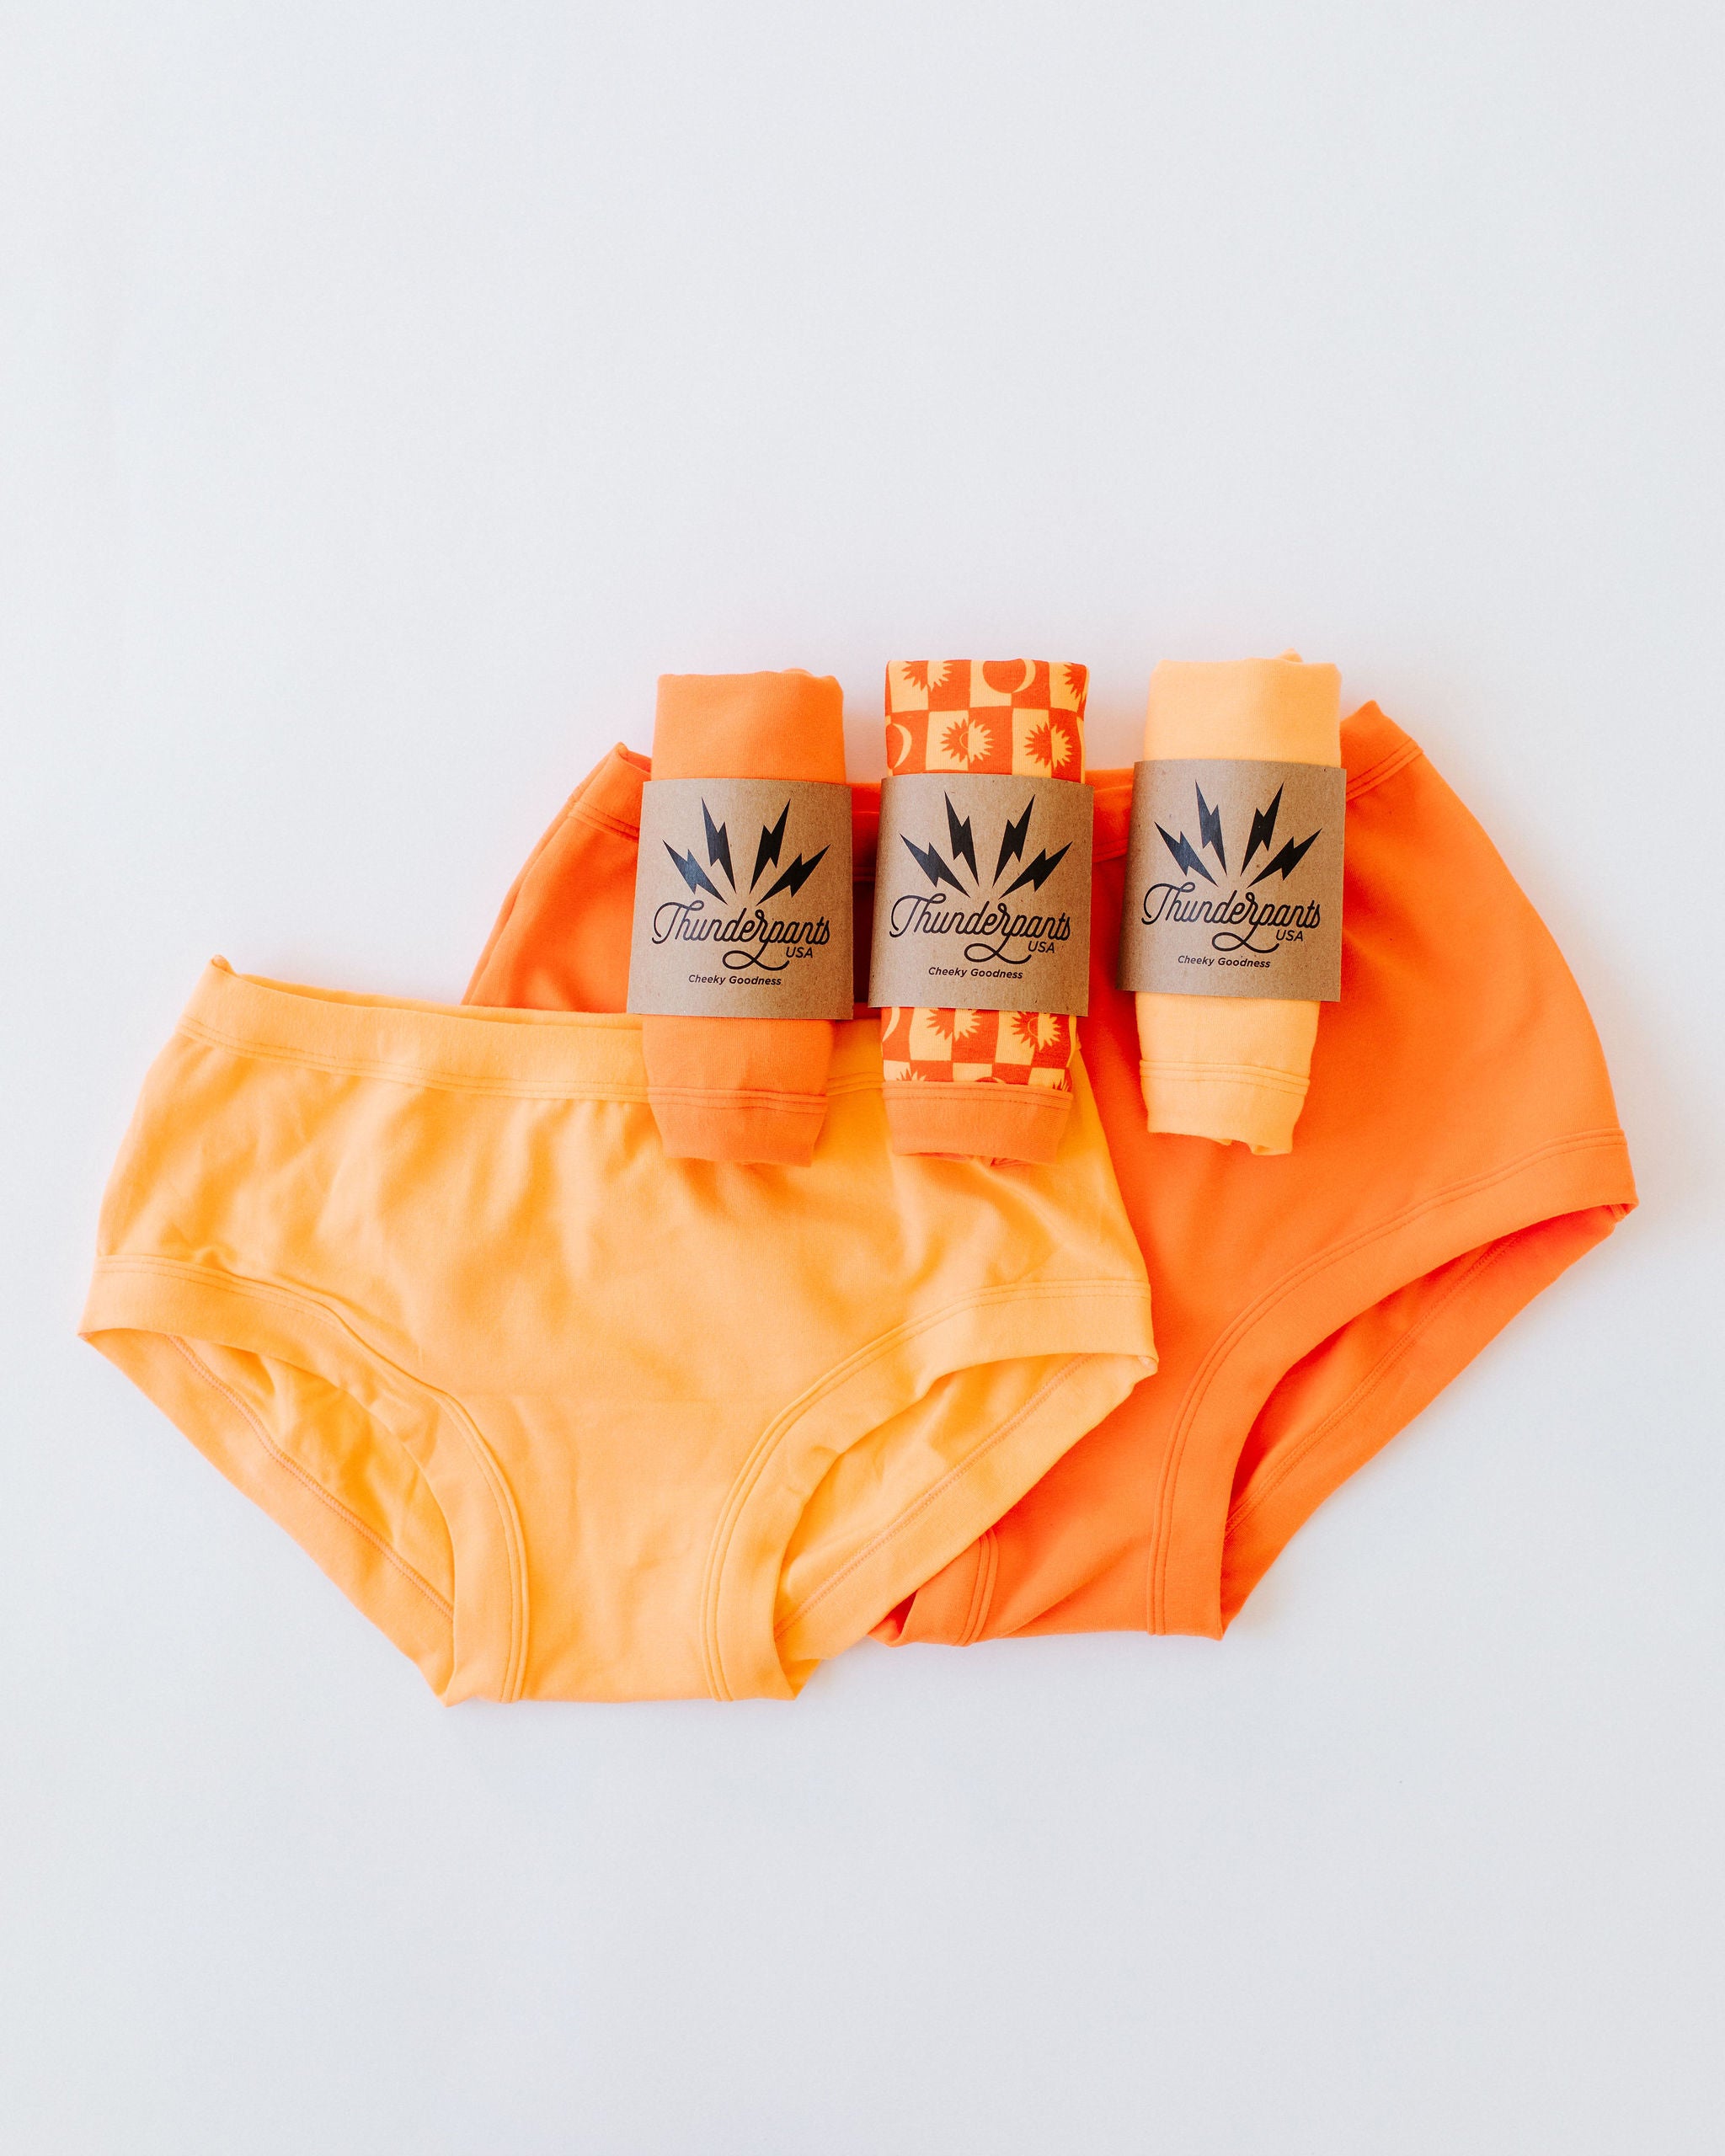 Flat lay of Thunderpants Hipster and Original style underwear with three packaged pairs in various orange colors.